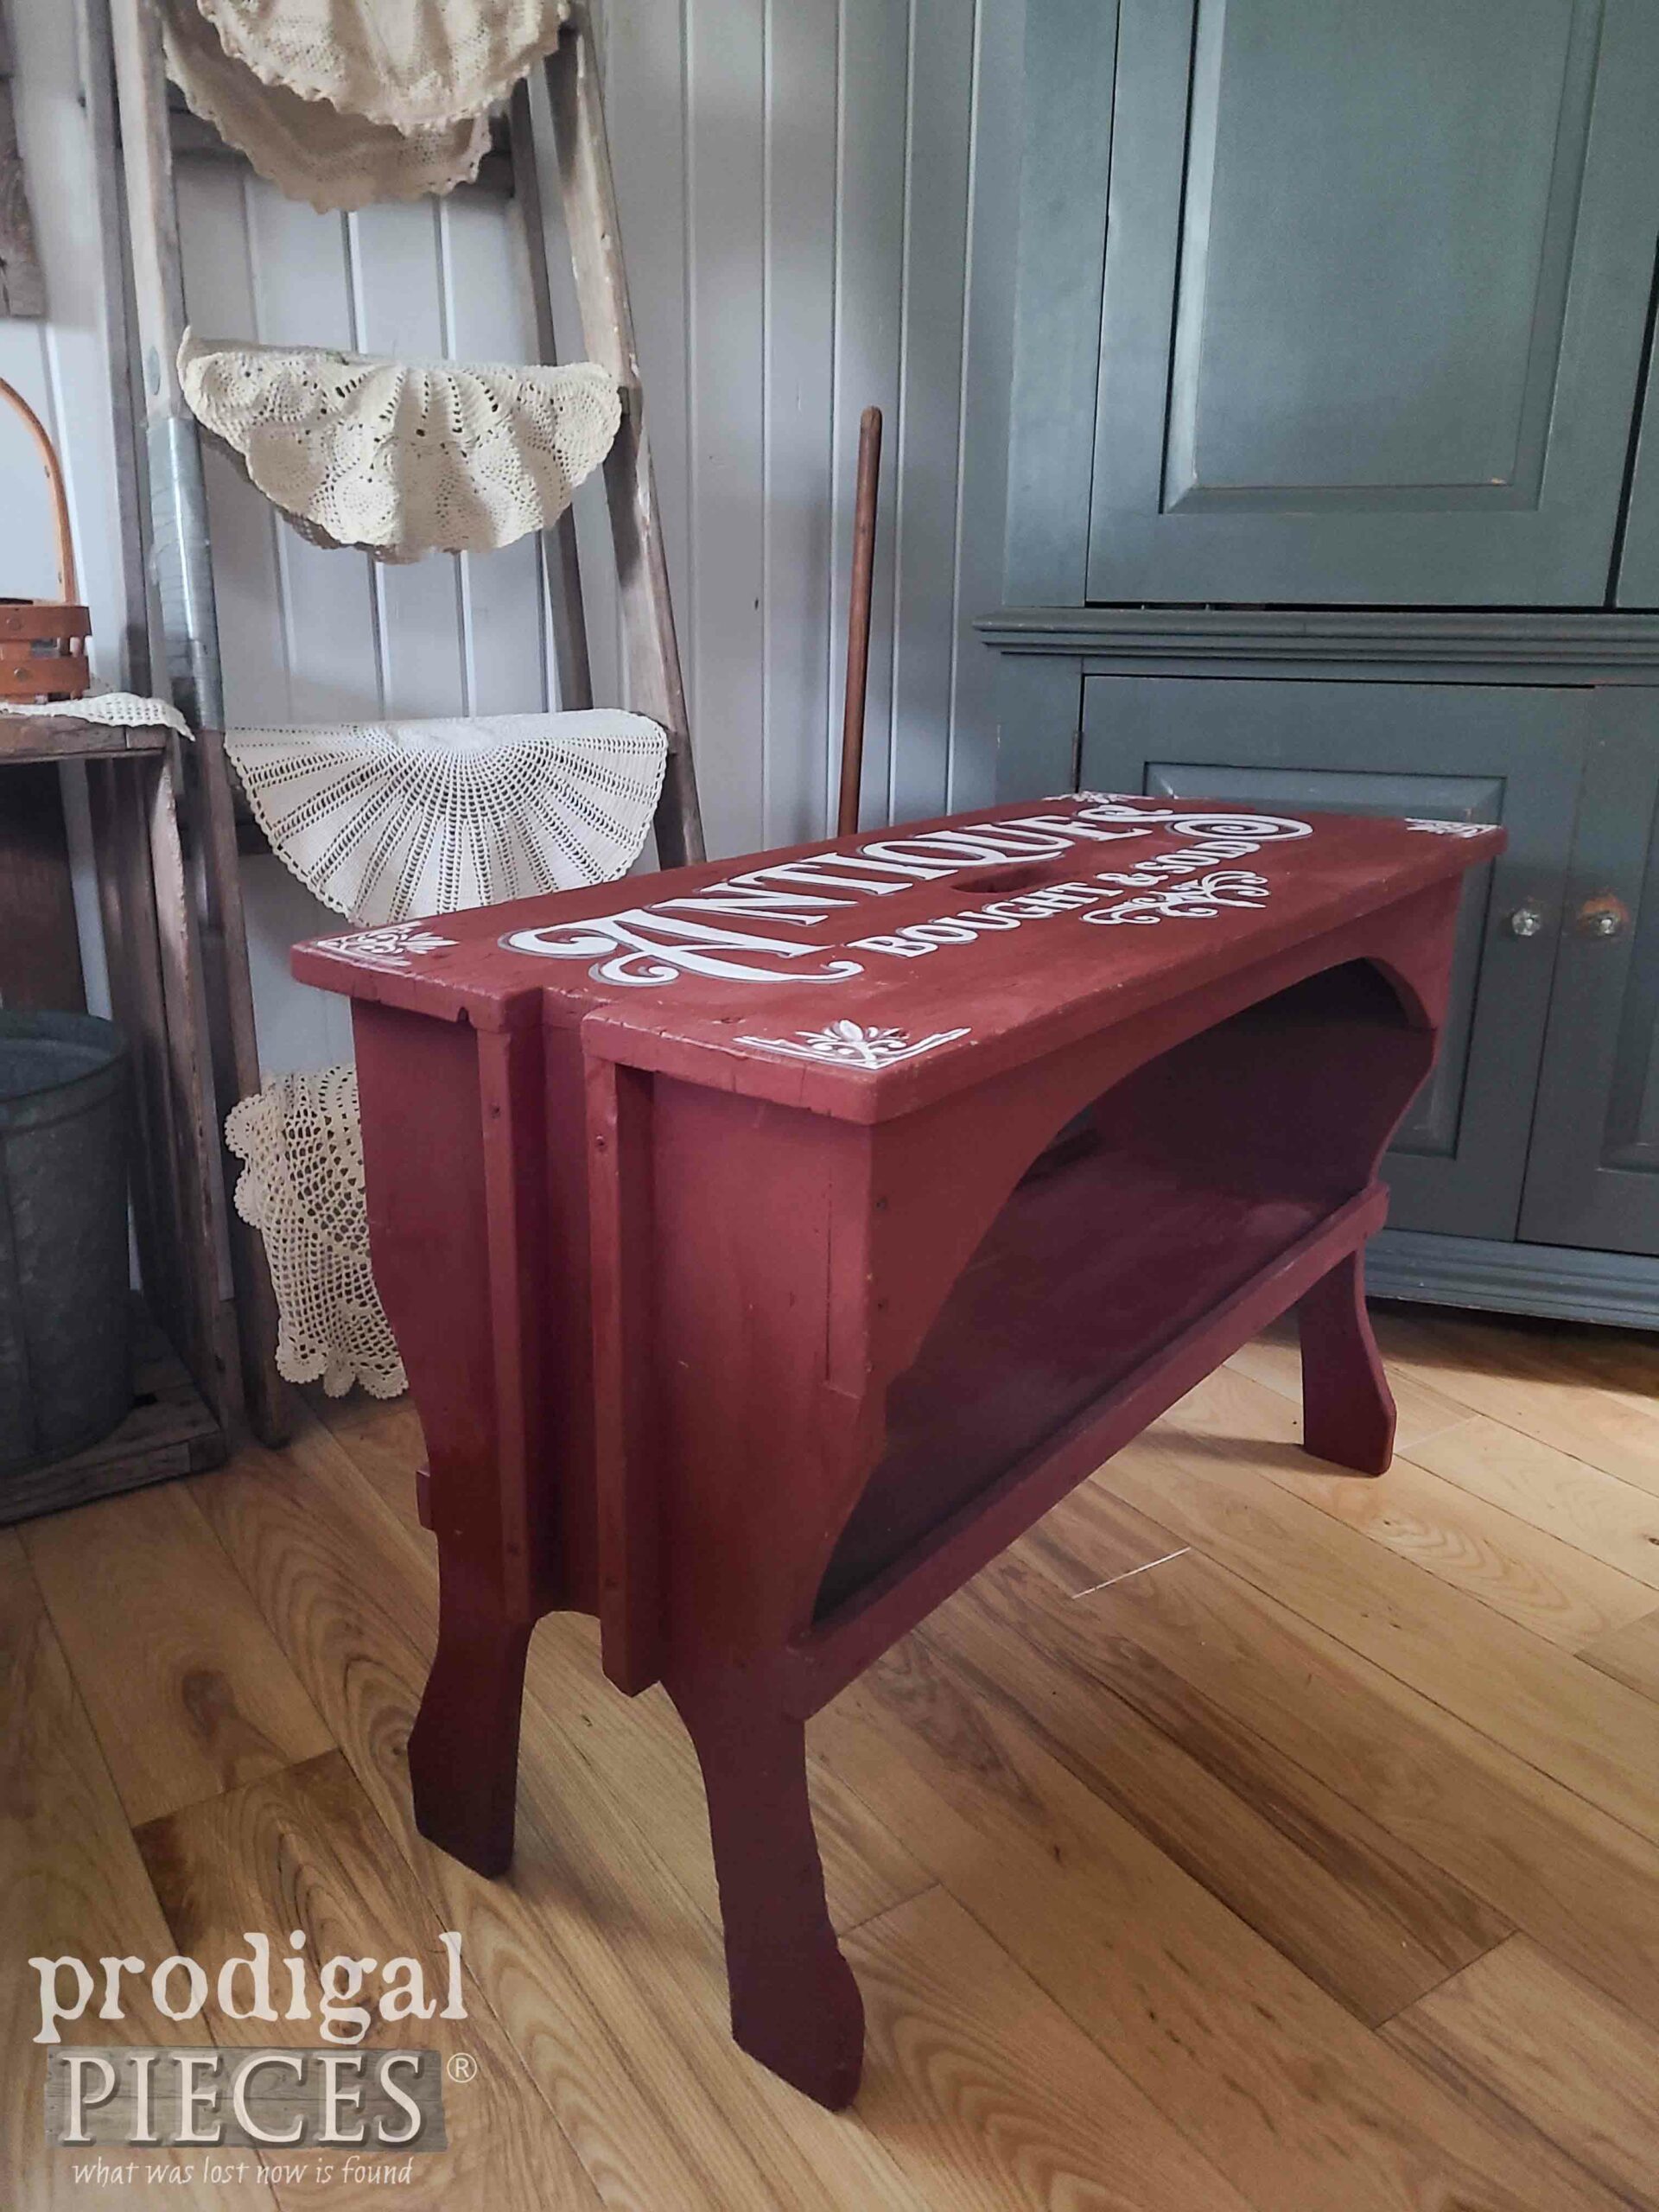 Handmade Farmhouse Bench in Barn Red Milk Paint with Typography by Larissa of Prodigal Pieces | prodigalpieces.com #prodigalpieces